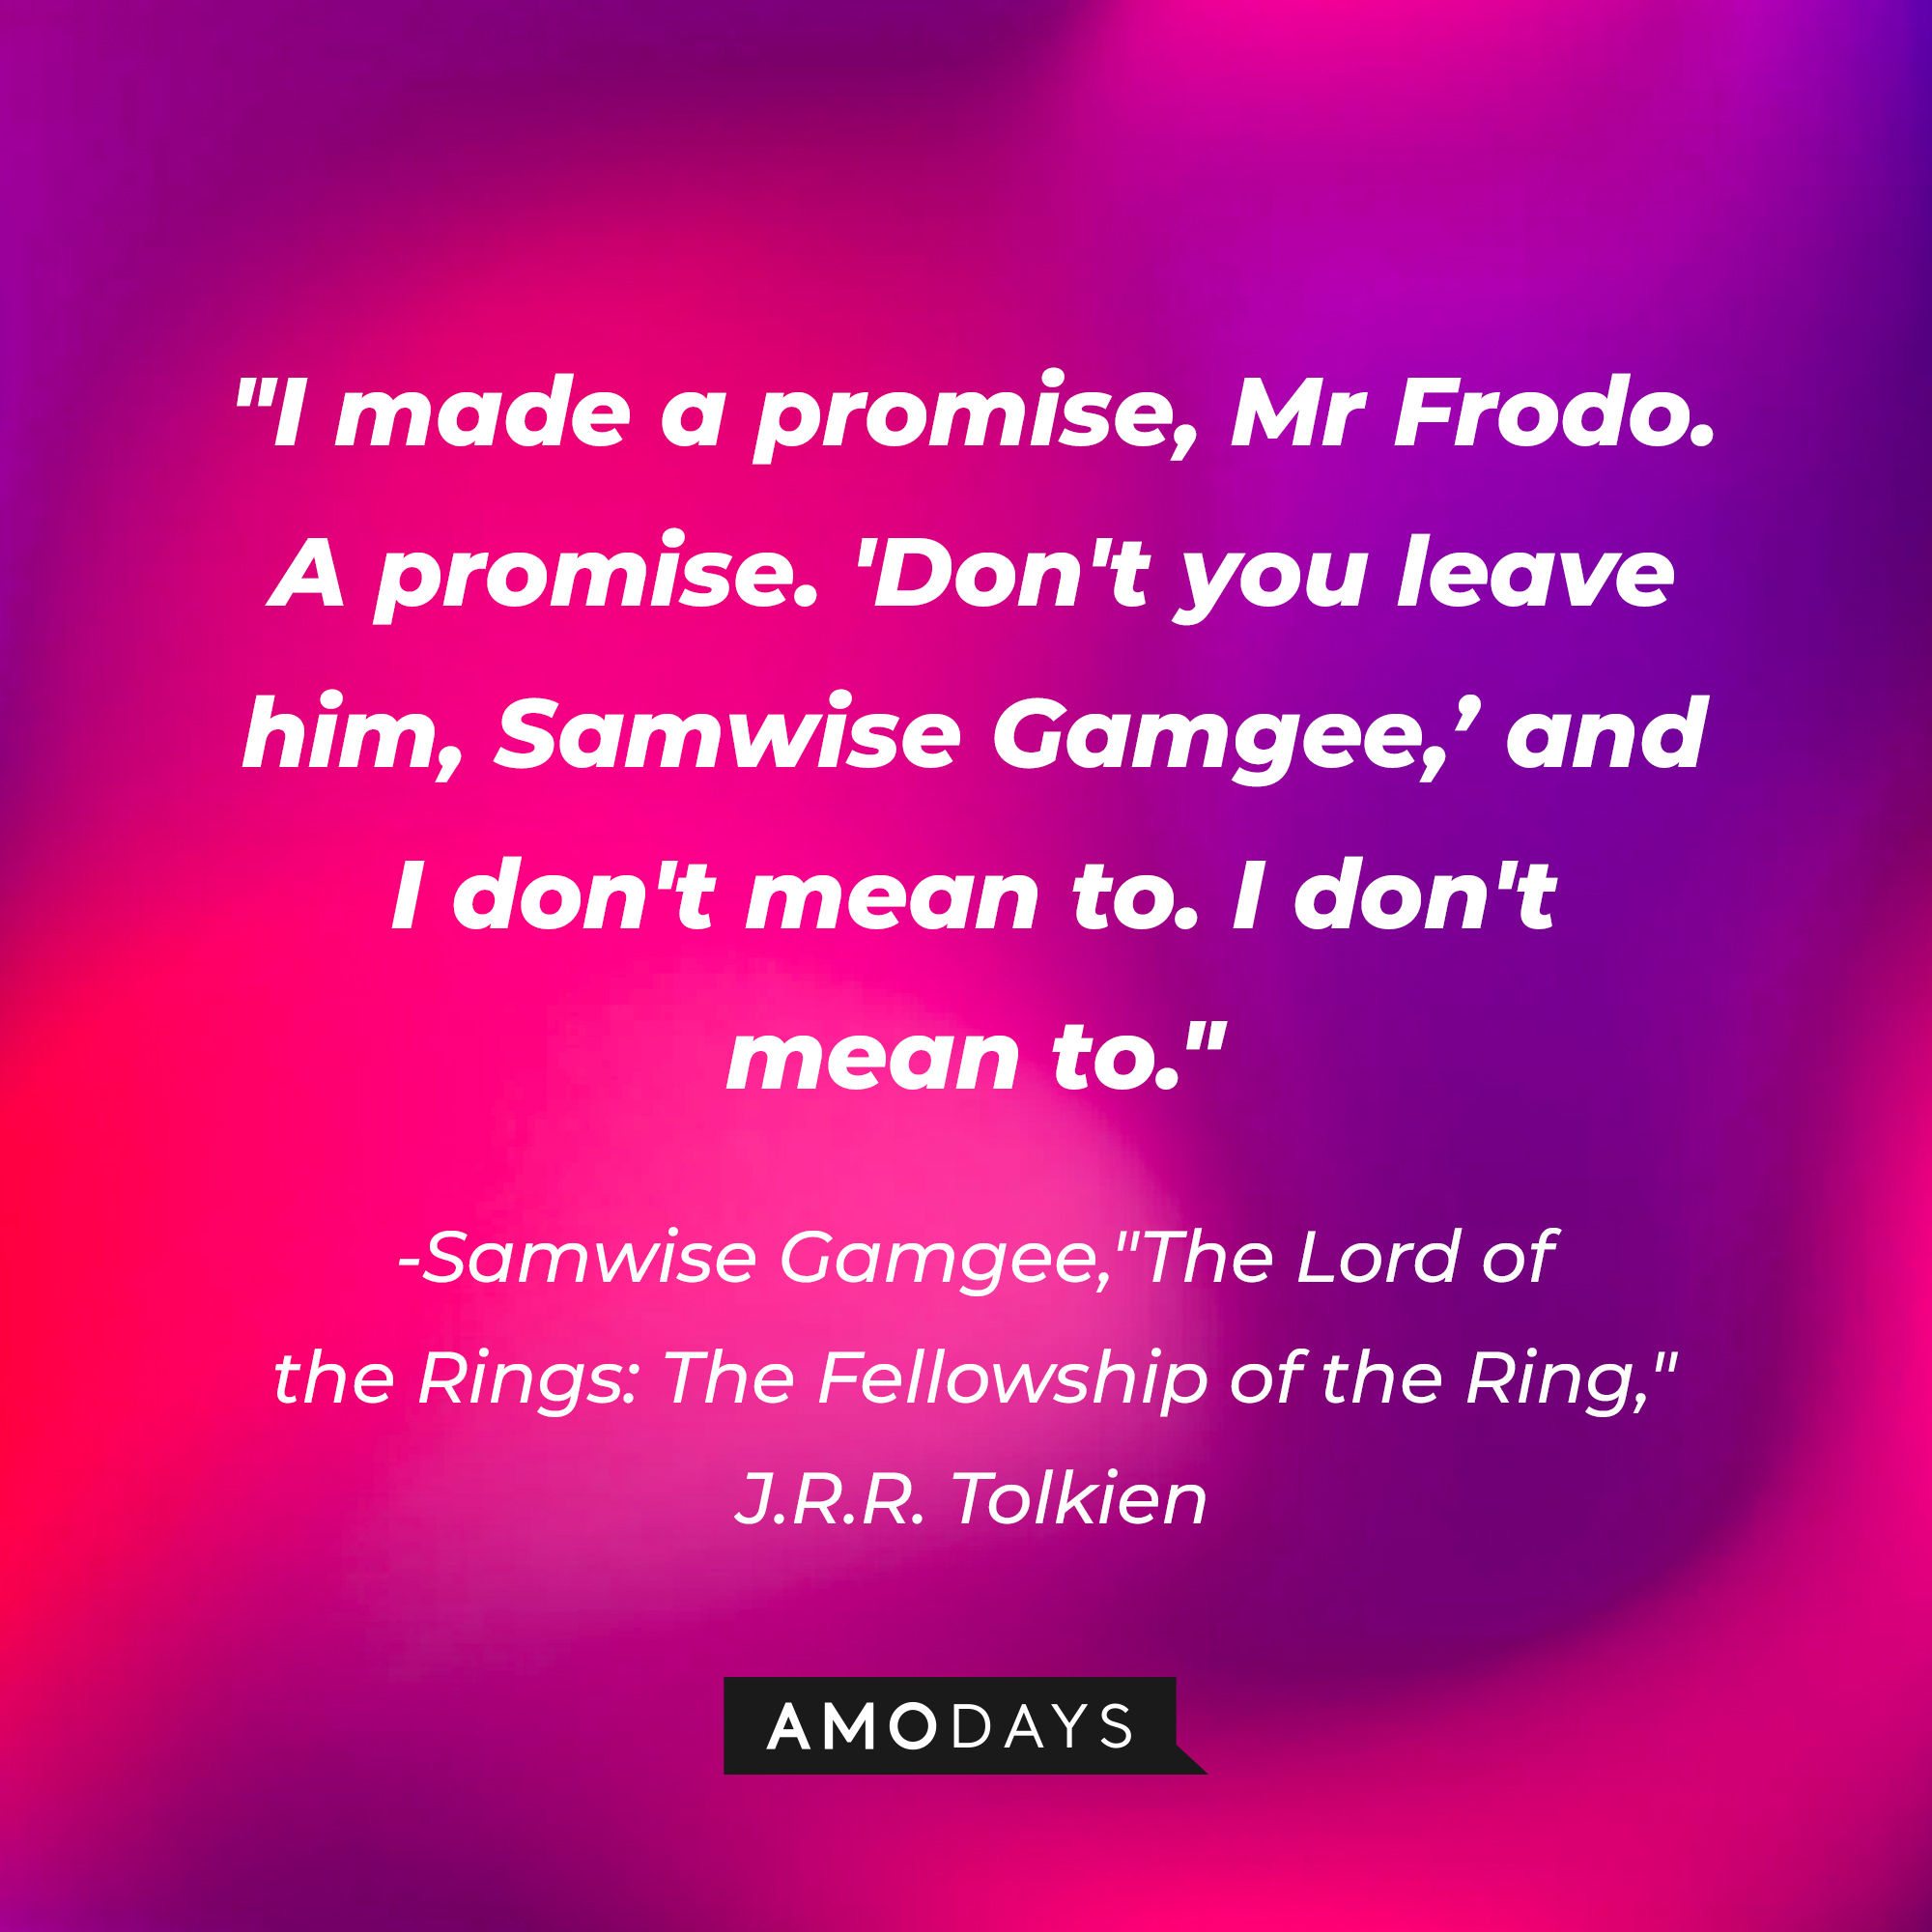 Samwise Gamgee’s quote from “The Lord of the Rings: The Fellowship of the Ring” by J.R.R Tolkien: “I made a promise, Mr Frodo. A promise. ‘Don’t you leave him Samwise Gamgee.’ And I don’t mean to.'” | Source: AmoDays